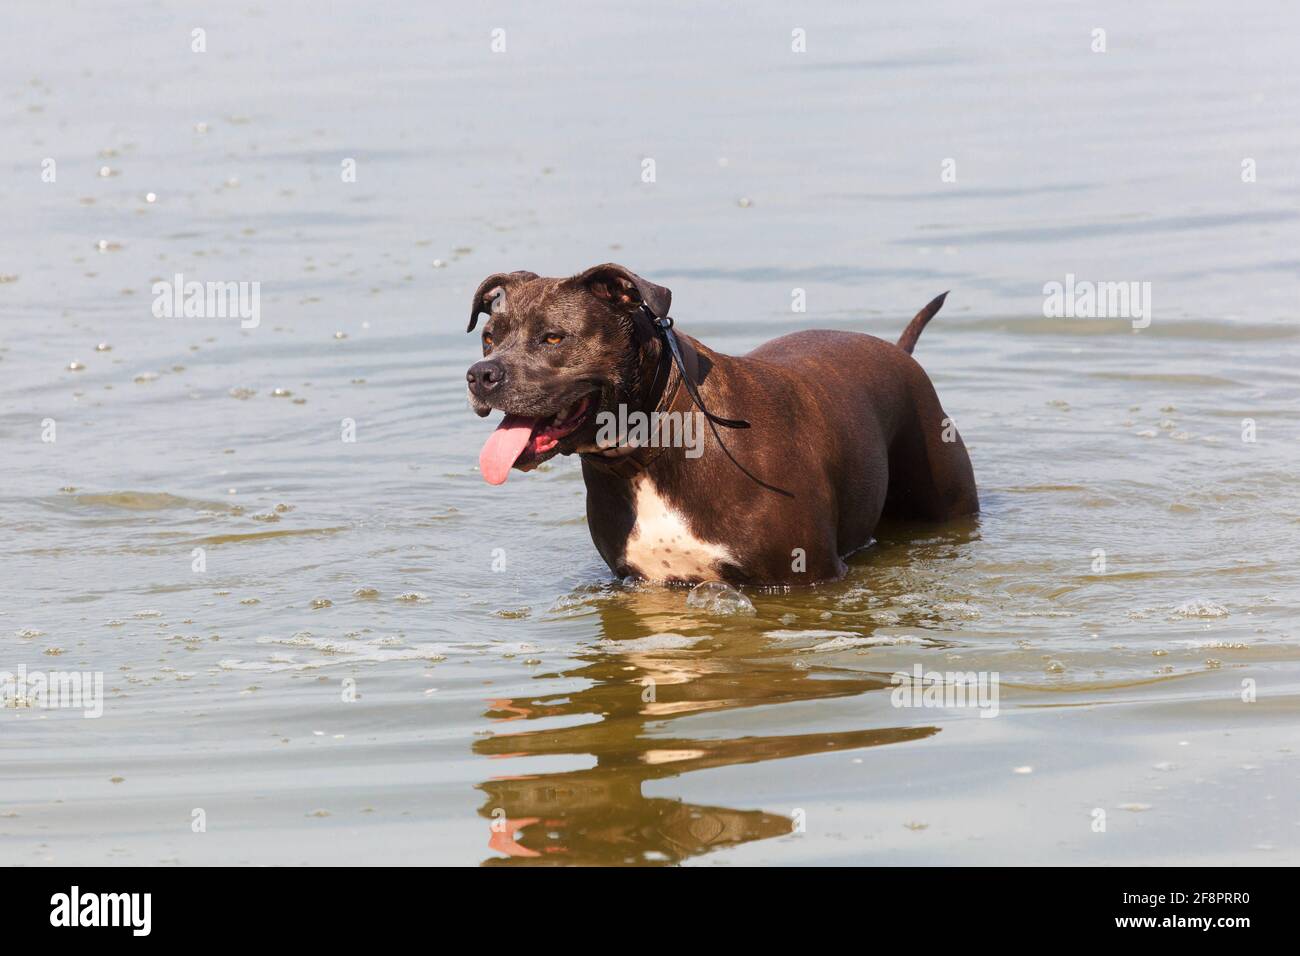 Pitbull dog standing in the water with his tongue out Stock Photo